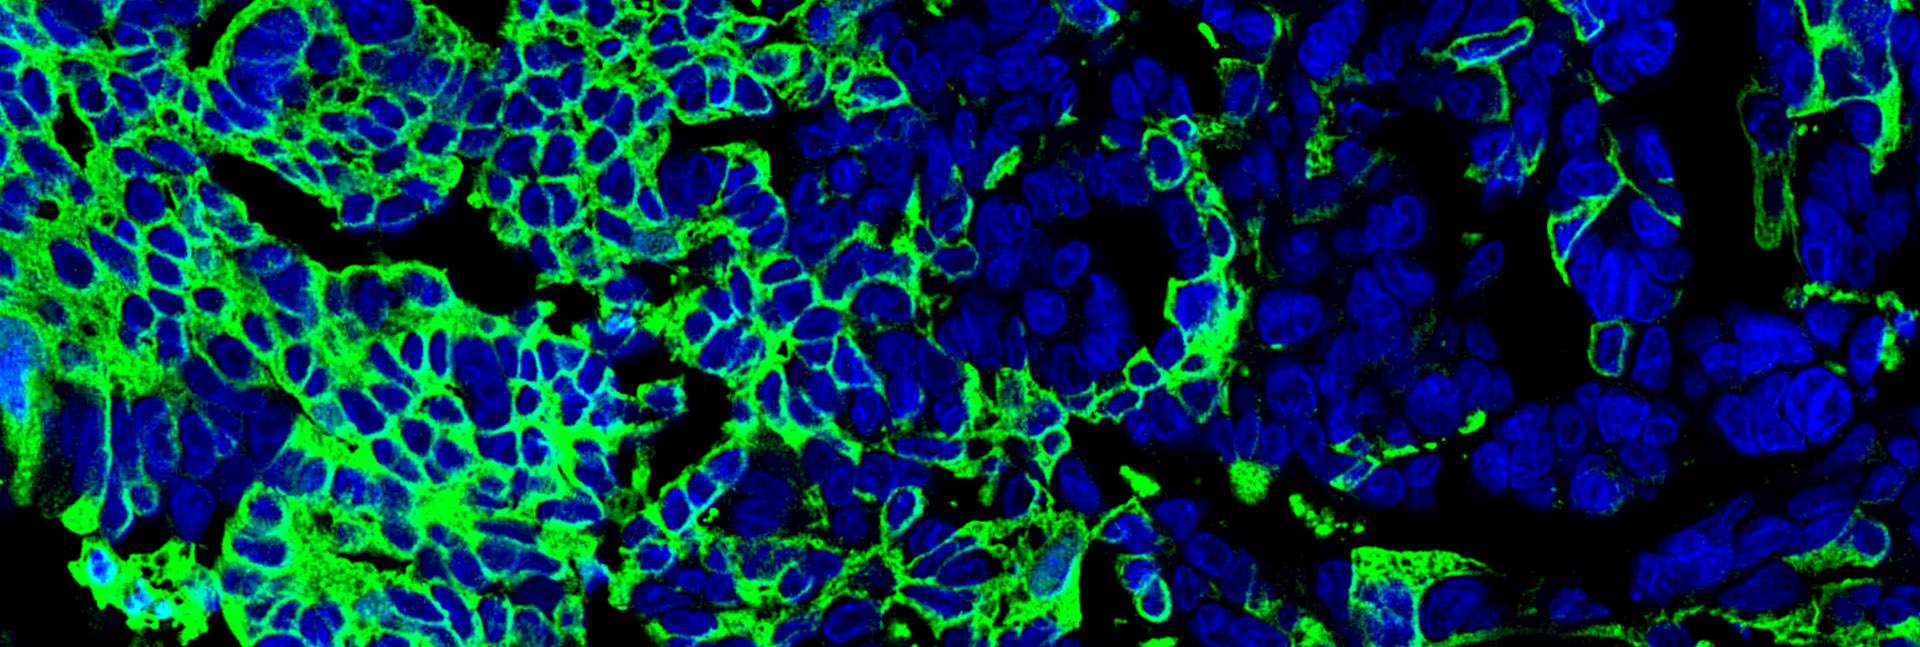 Natural anticancer antibodies (green) bound to ovarian tumor cells; the cells’ nuclei are in blue. Viewed with confocal microscopy